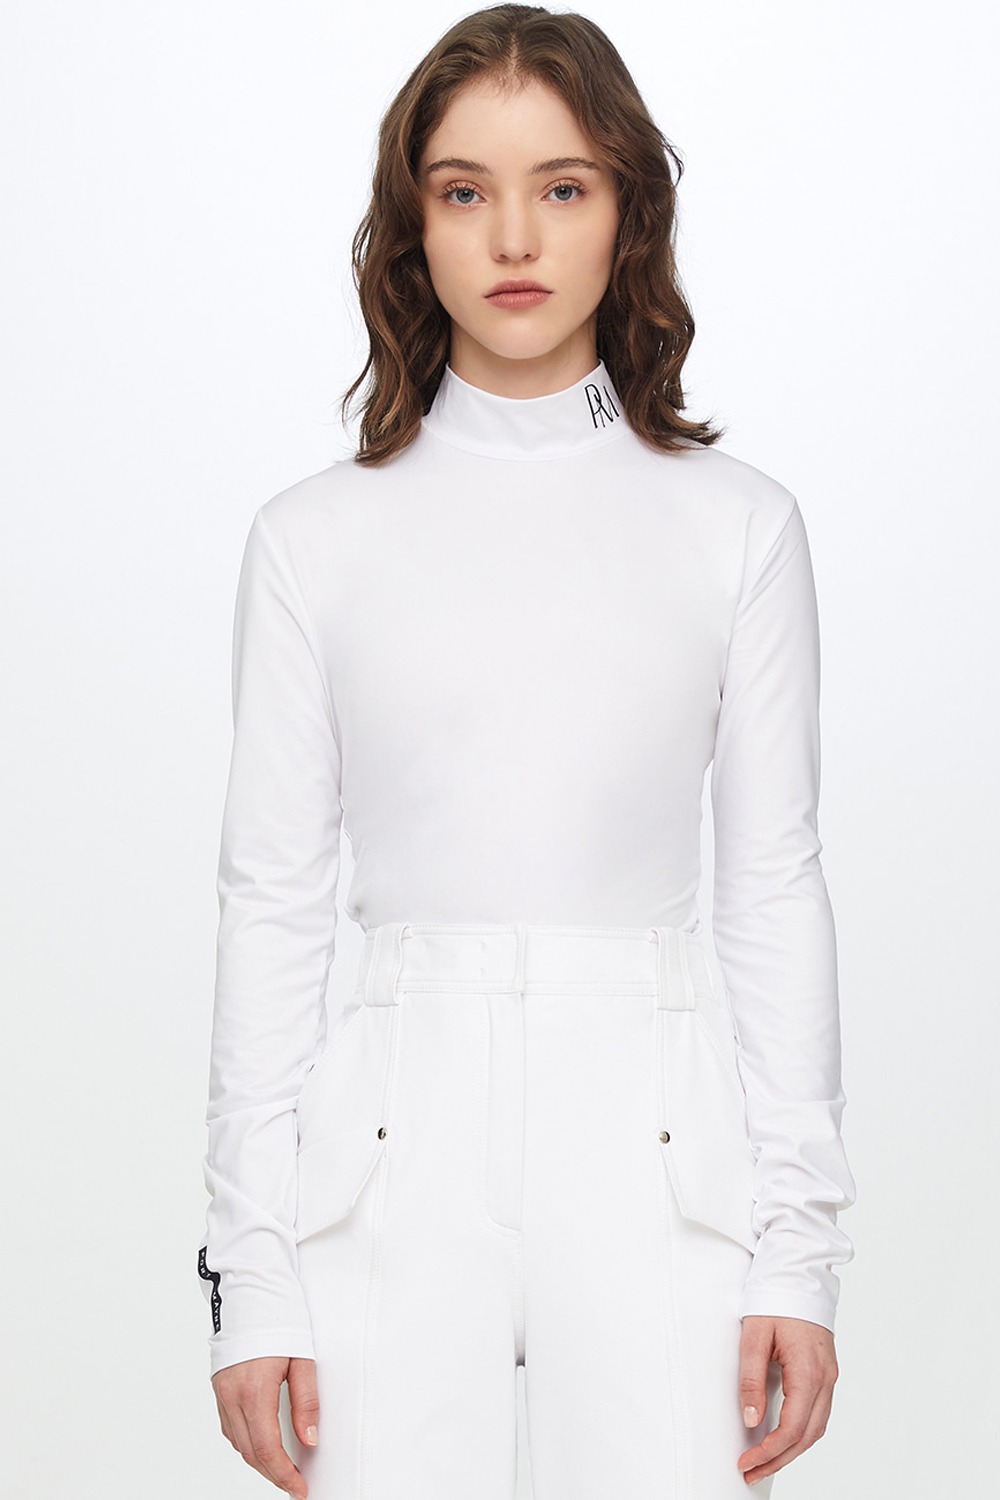 EVE MIDNECK INNER TOP - OFF WHITE